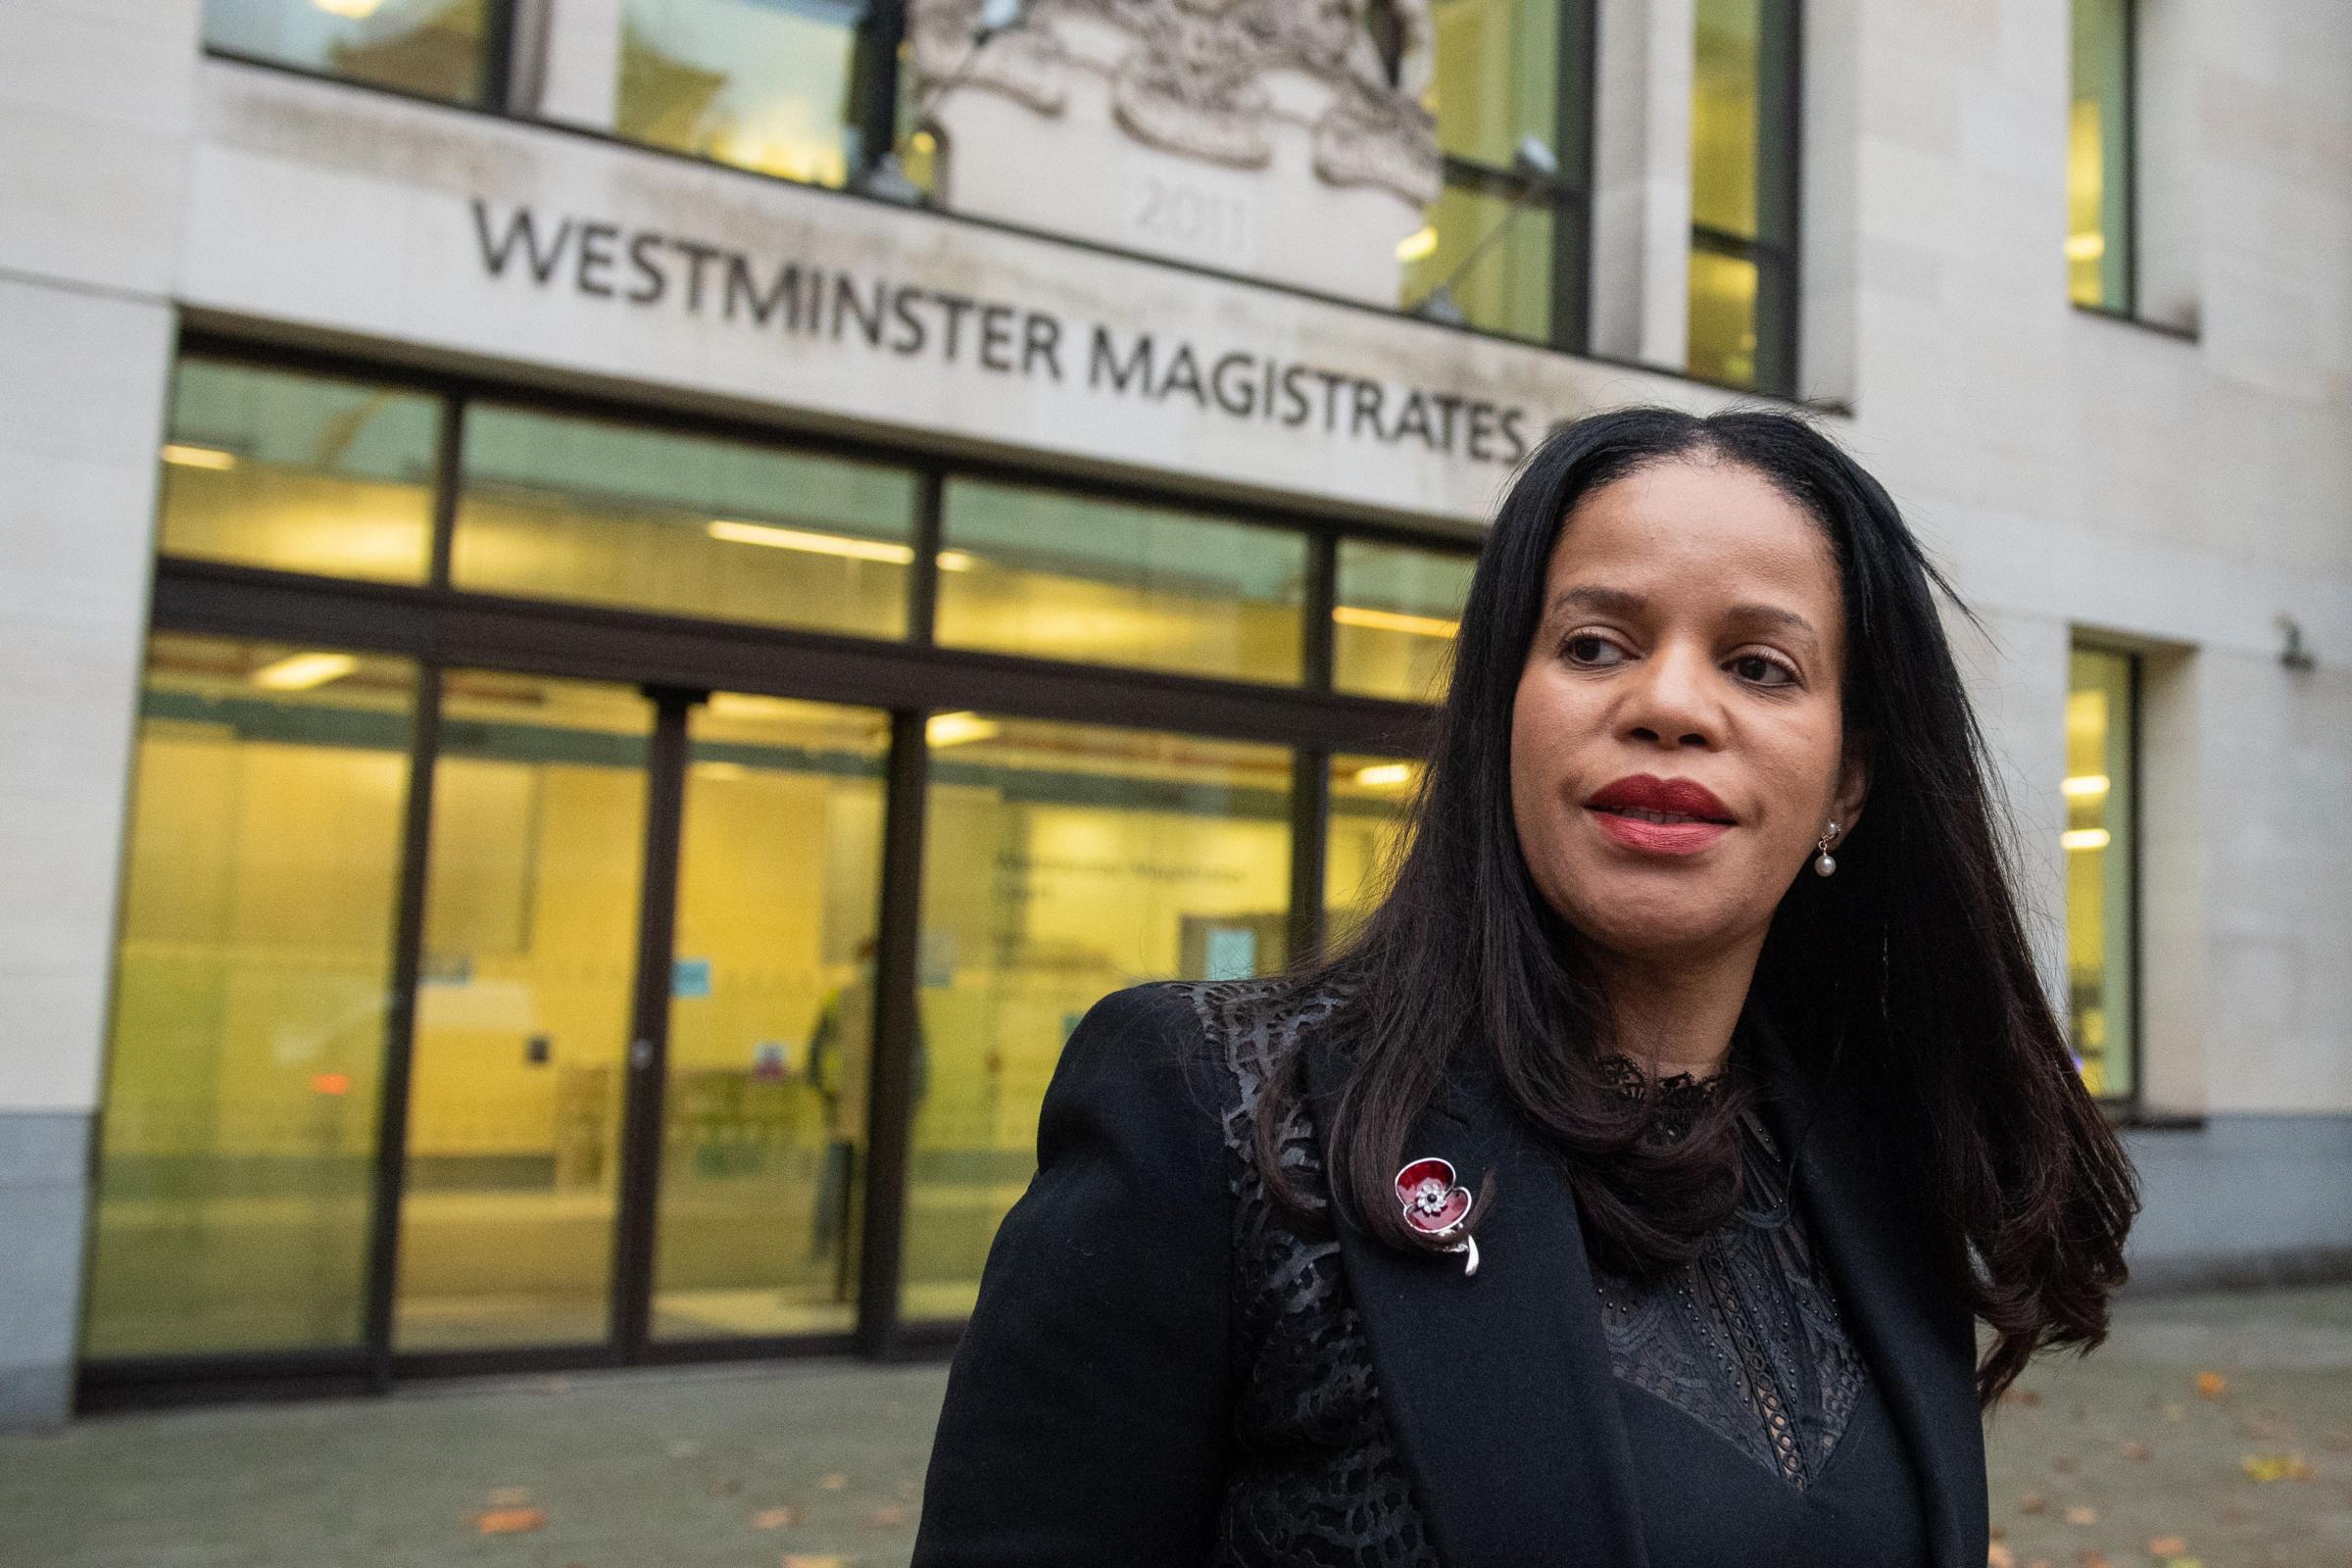 MP Claudia Webbe made naked pictures threat over jealousy, court told Times Series